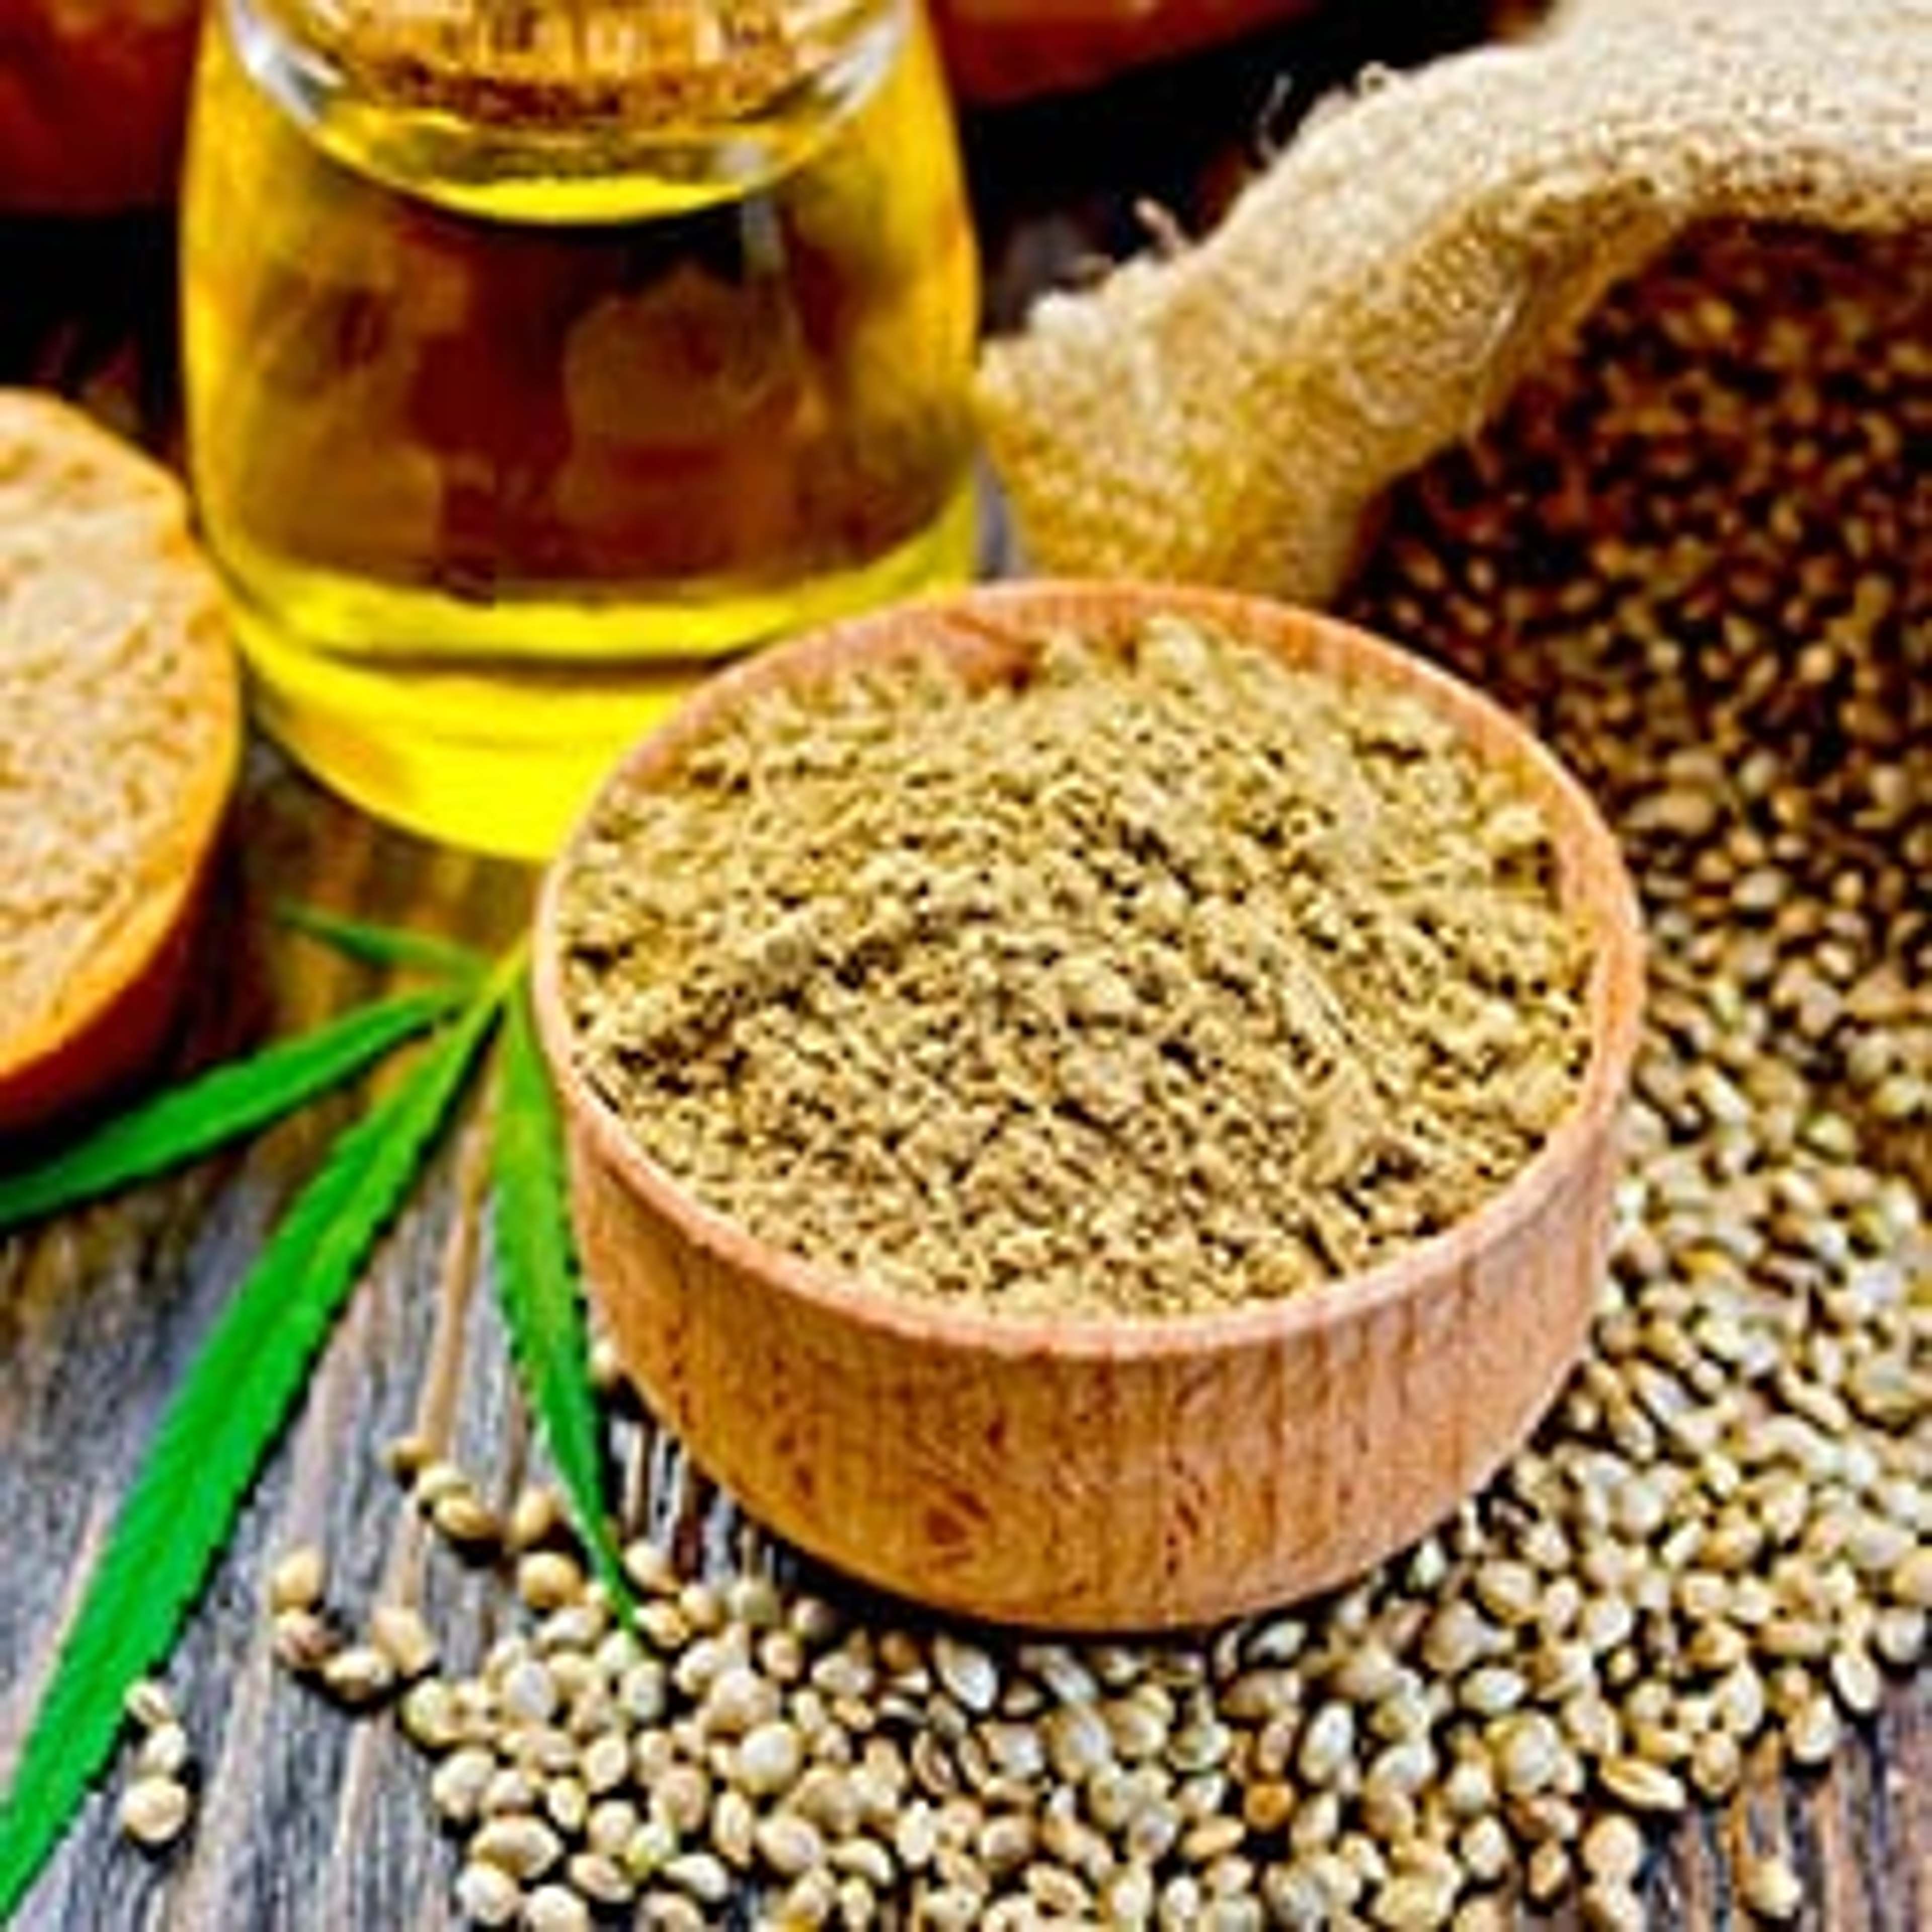 Hemp Protein is a vegetable source of protein that can enhance athletic performance, support weight loss goals and provide essential fatty acids to combat inflammatory conditions.